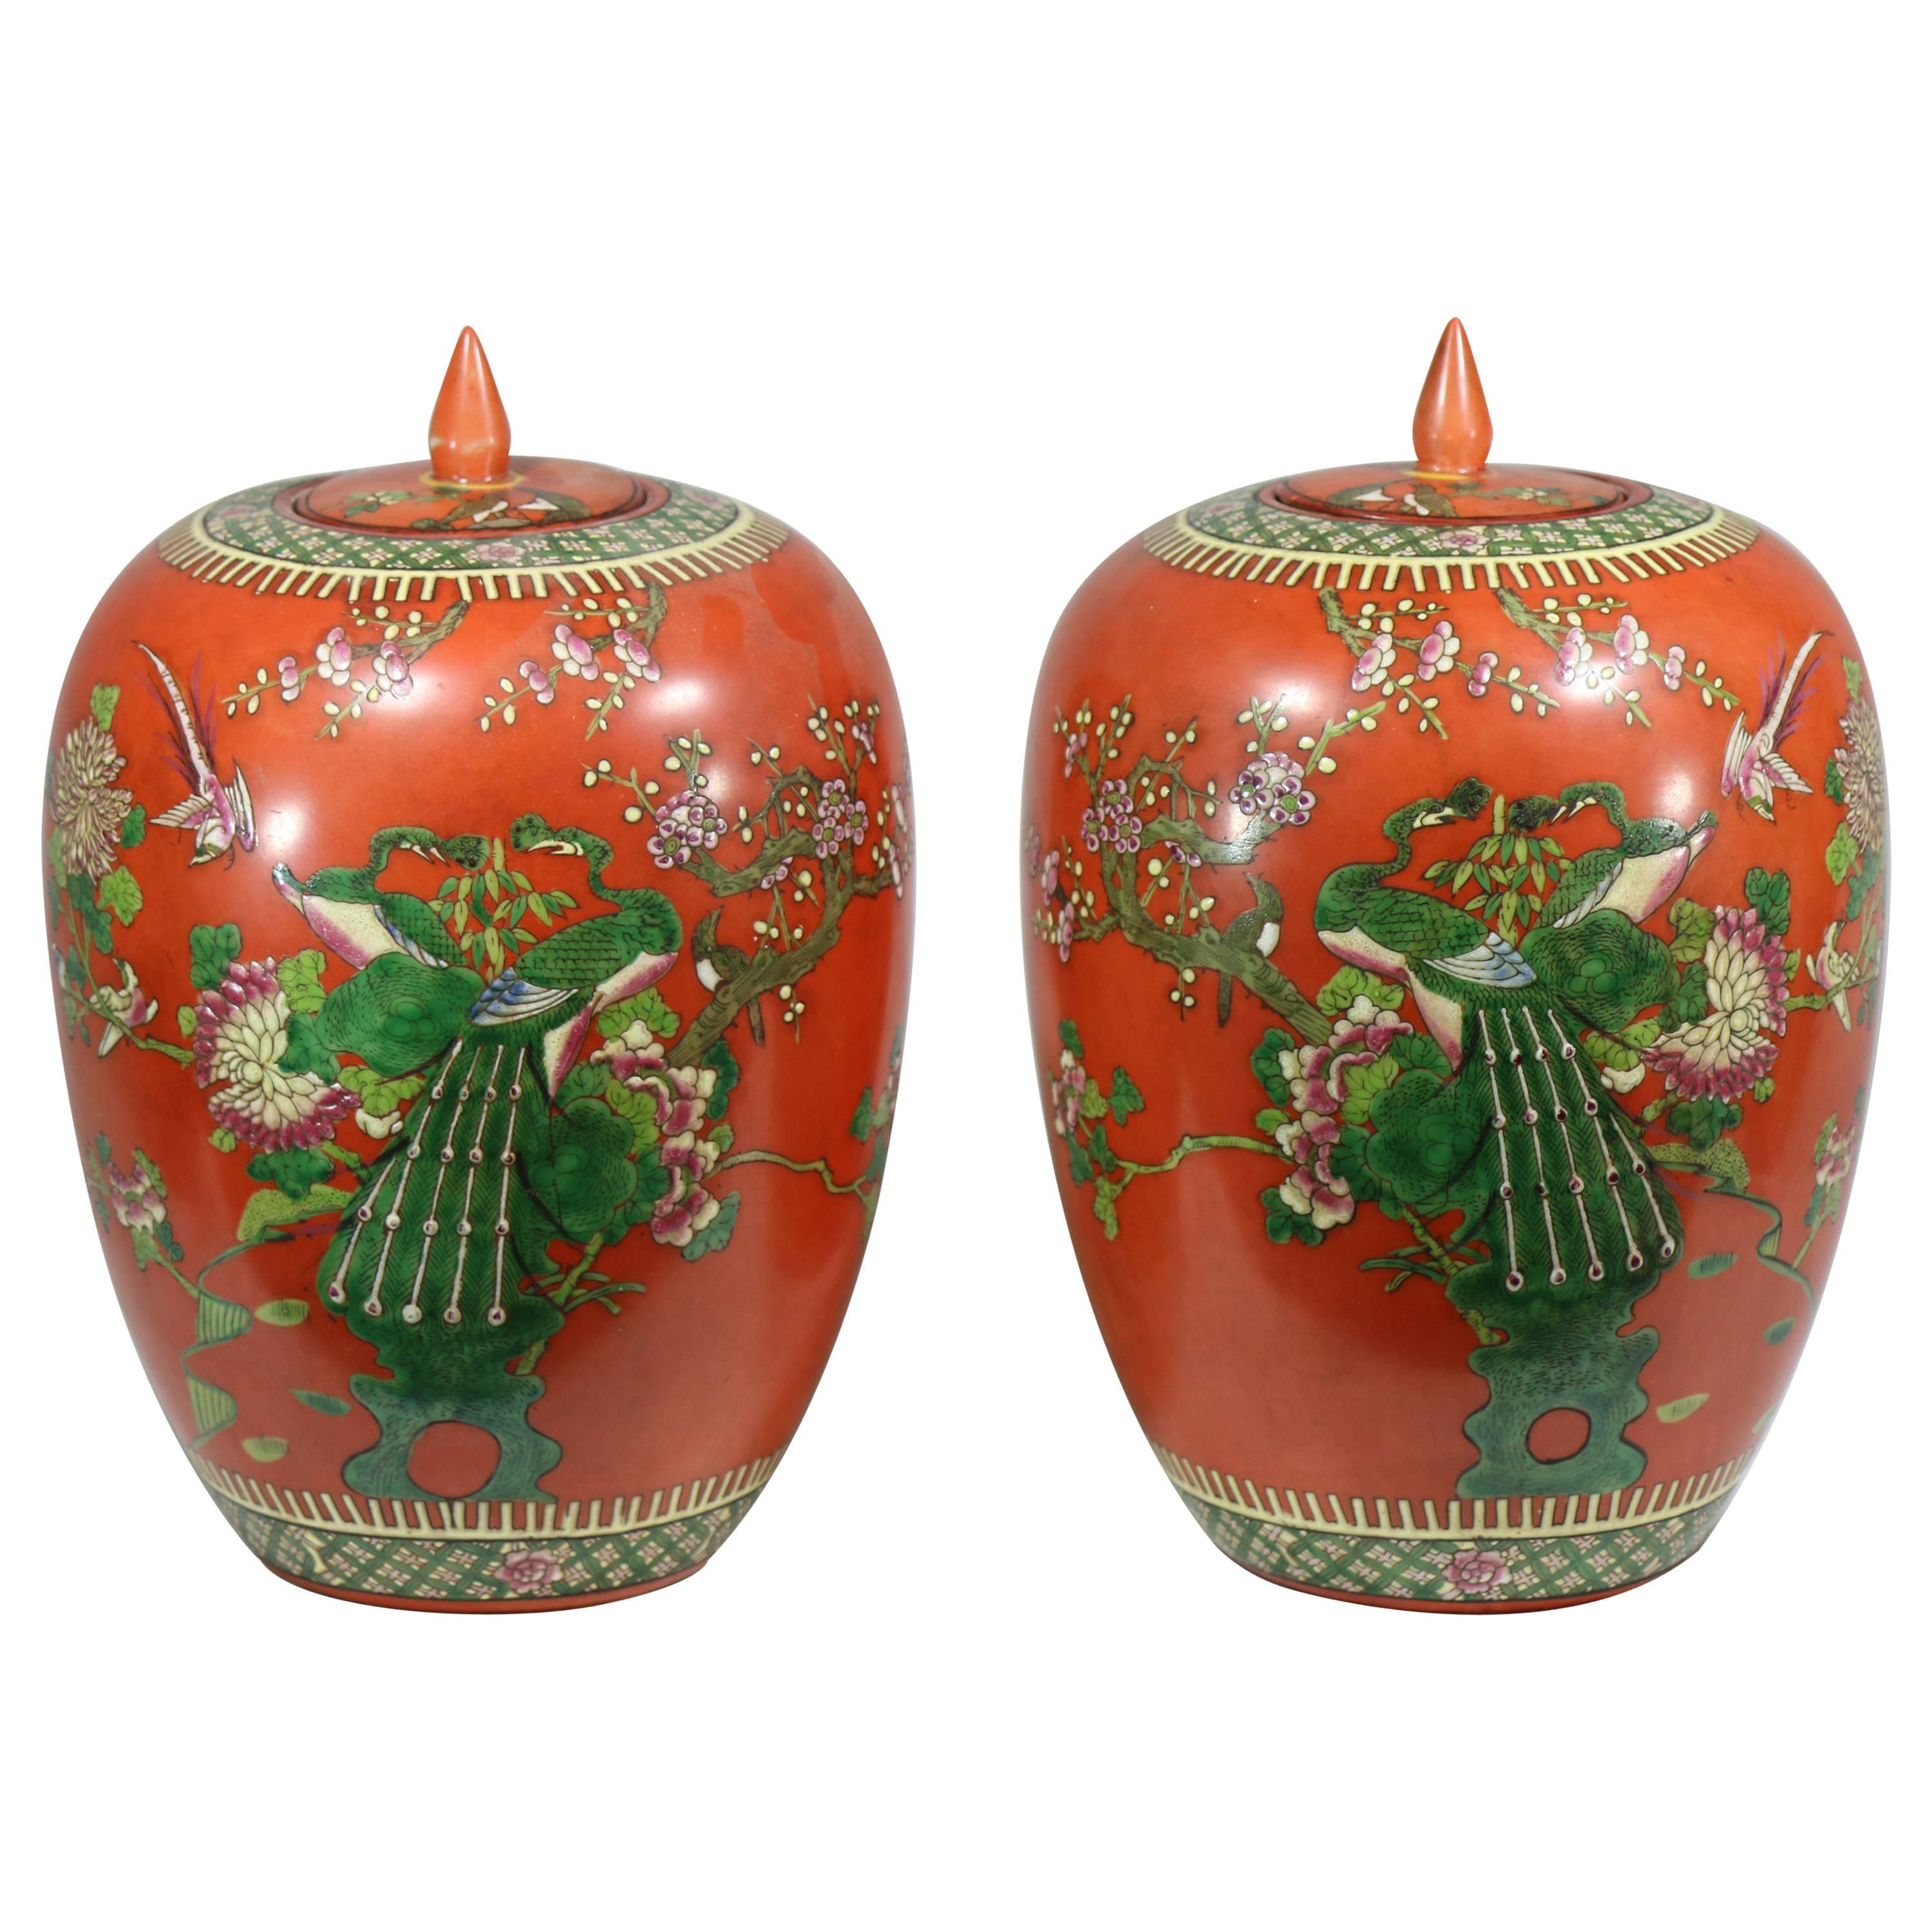 19th century Exquisite Pair of Persimmon Porcelain Ginger Jars- Qing Dynasty For Sale